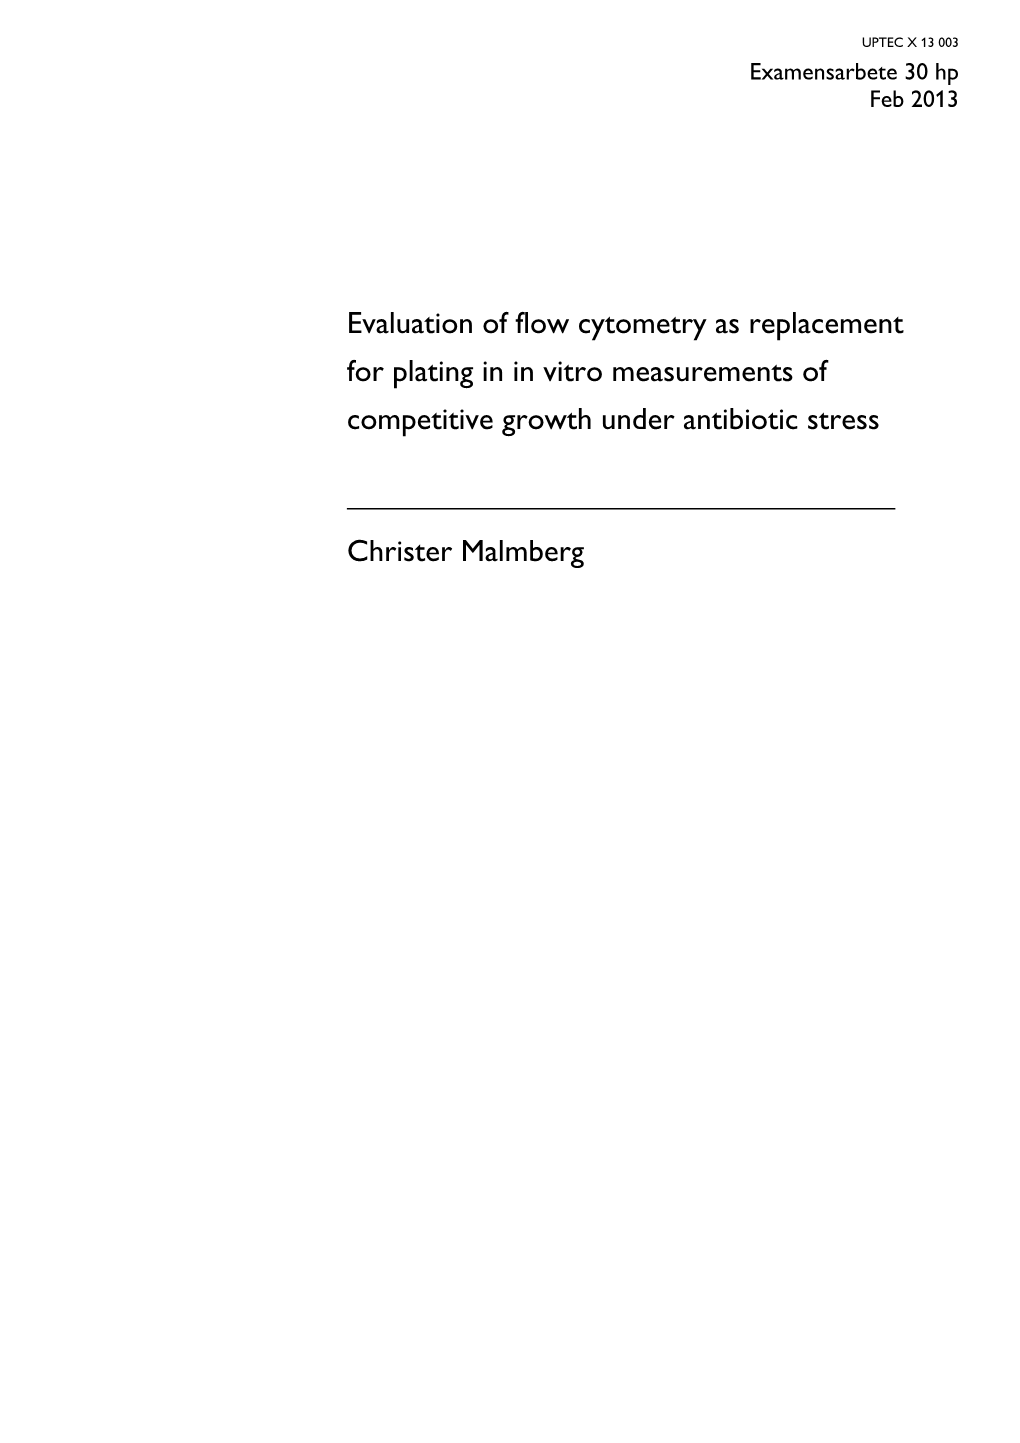 Evaluation of Flow Cytometry As Replacement for Plating in in Vitro Measurements of Competitive Growth Under Antibiotic Stress C